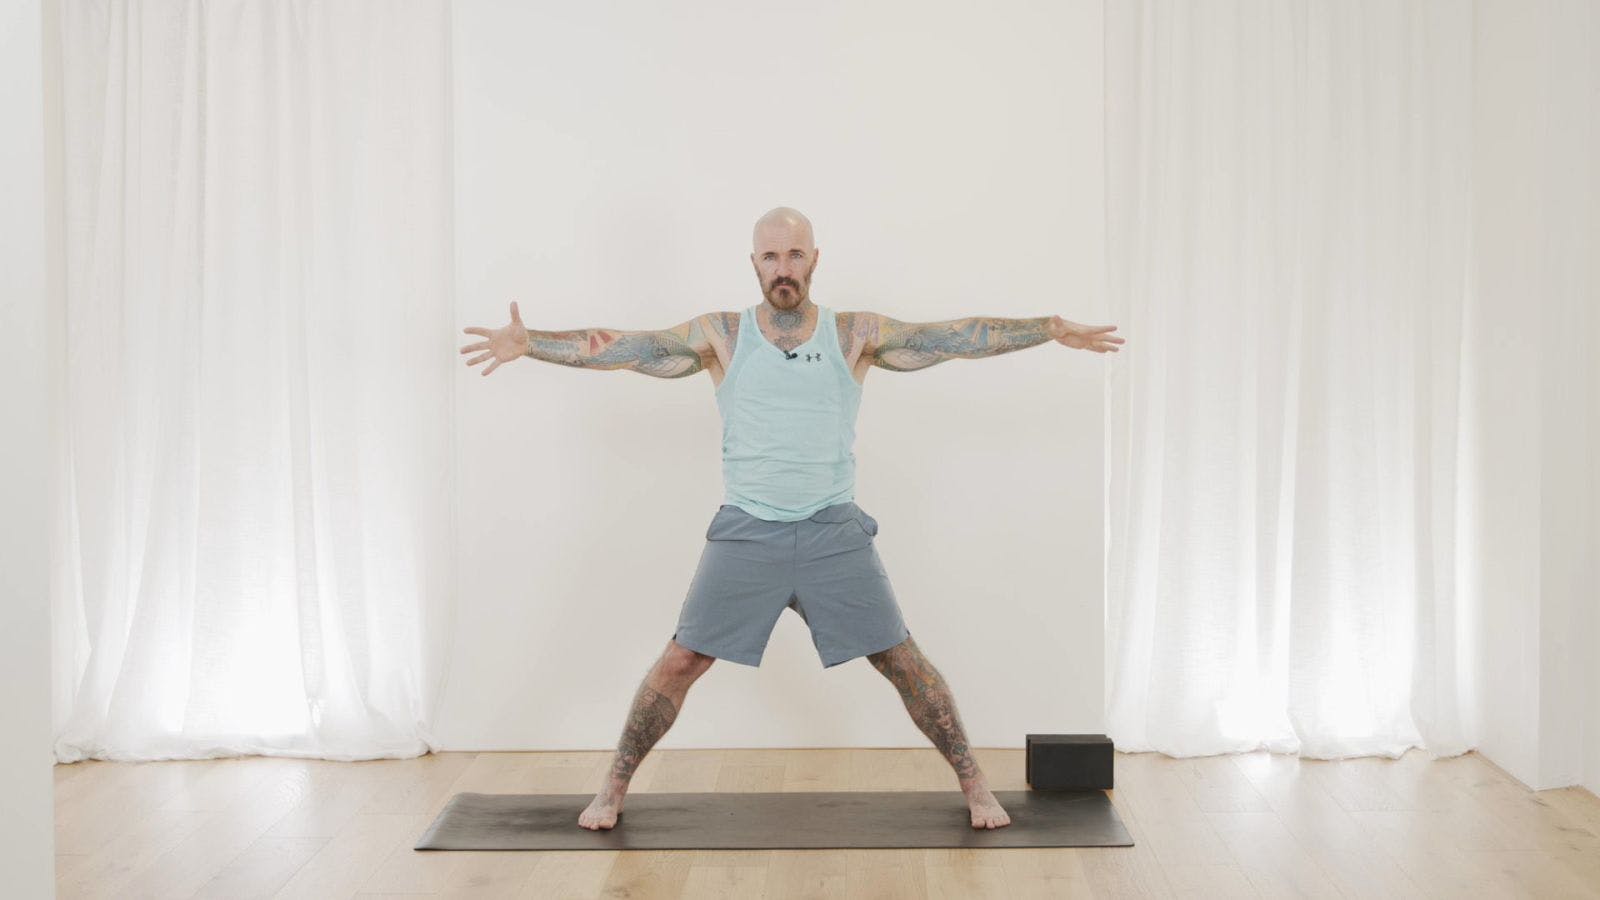 Yoga Foundations - Find Your Feet with Ari Levanael